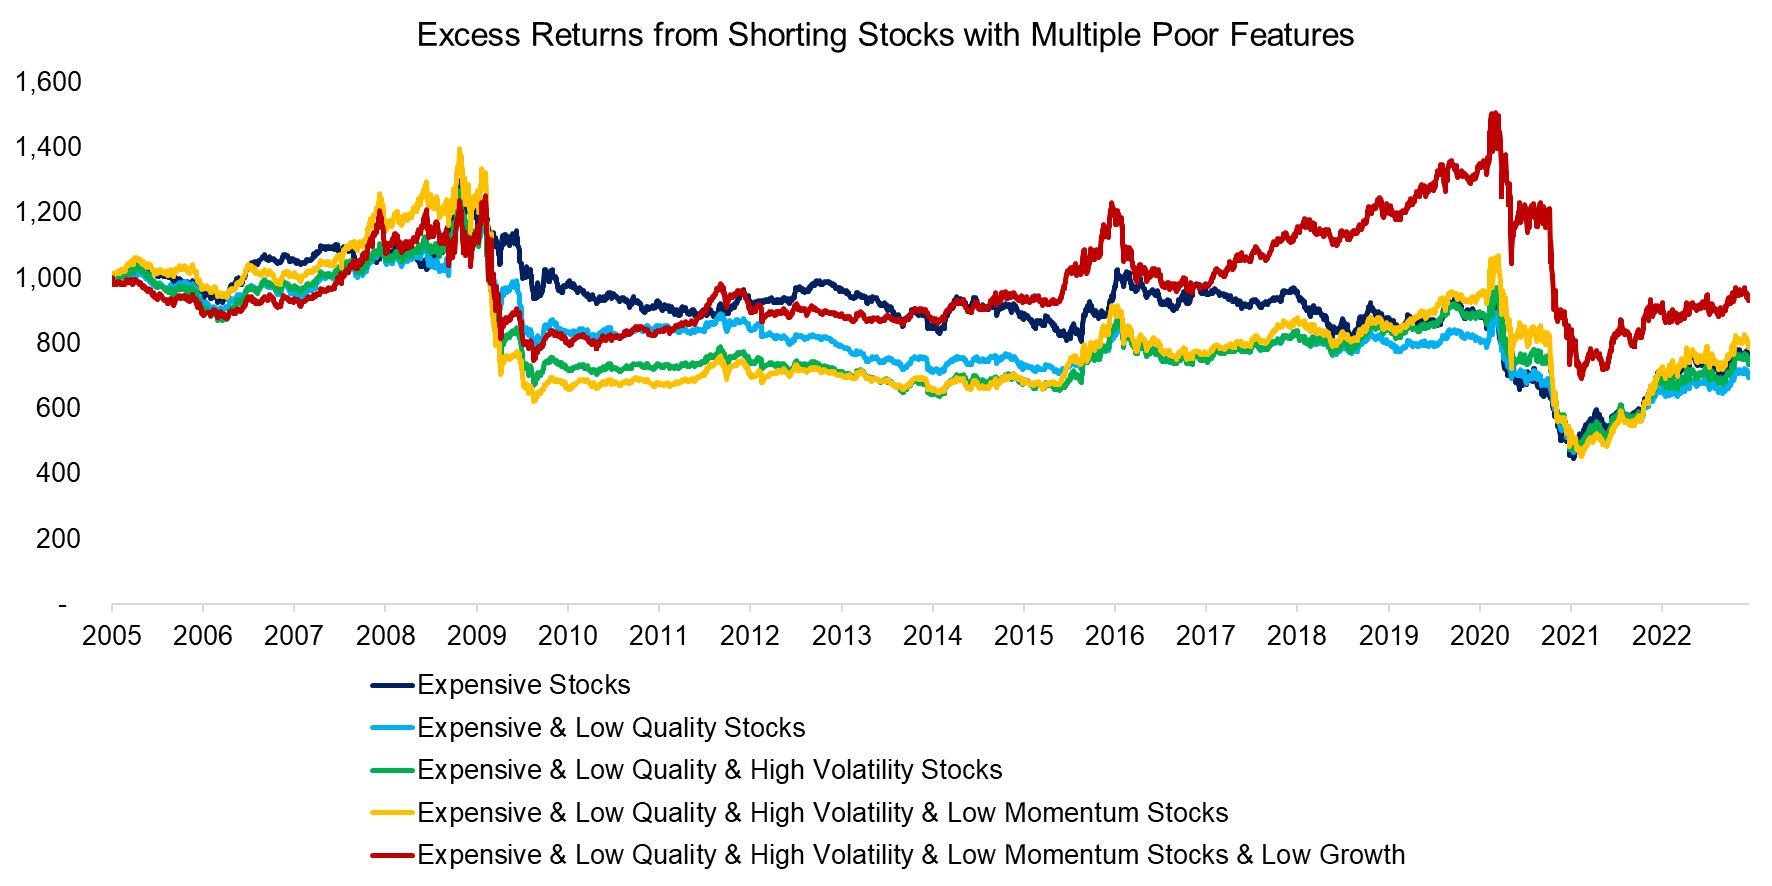 Excess Returns from Shorting Stocks with Multiple Poor Features